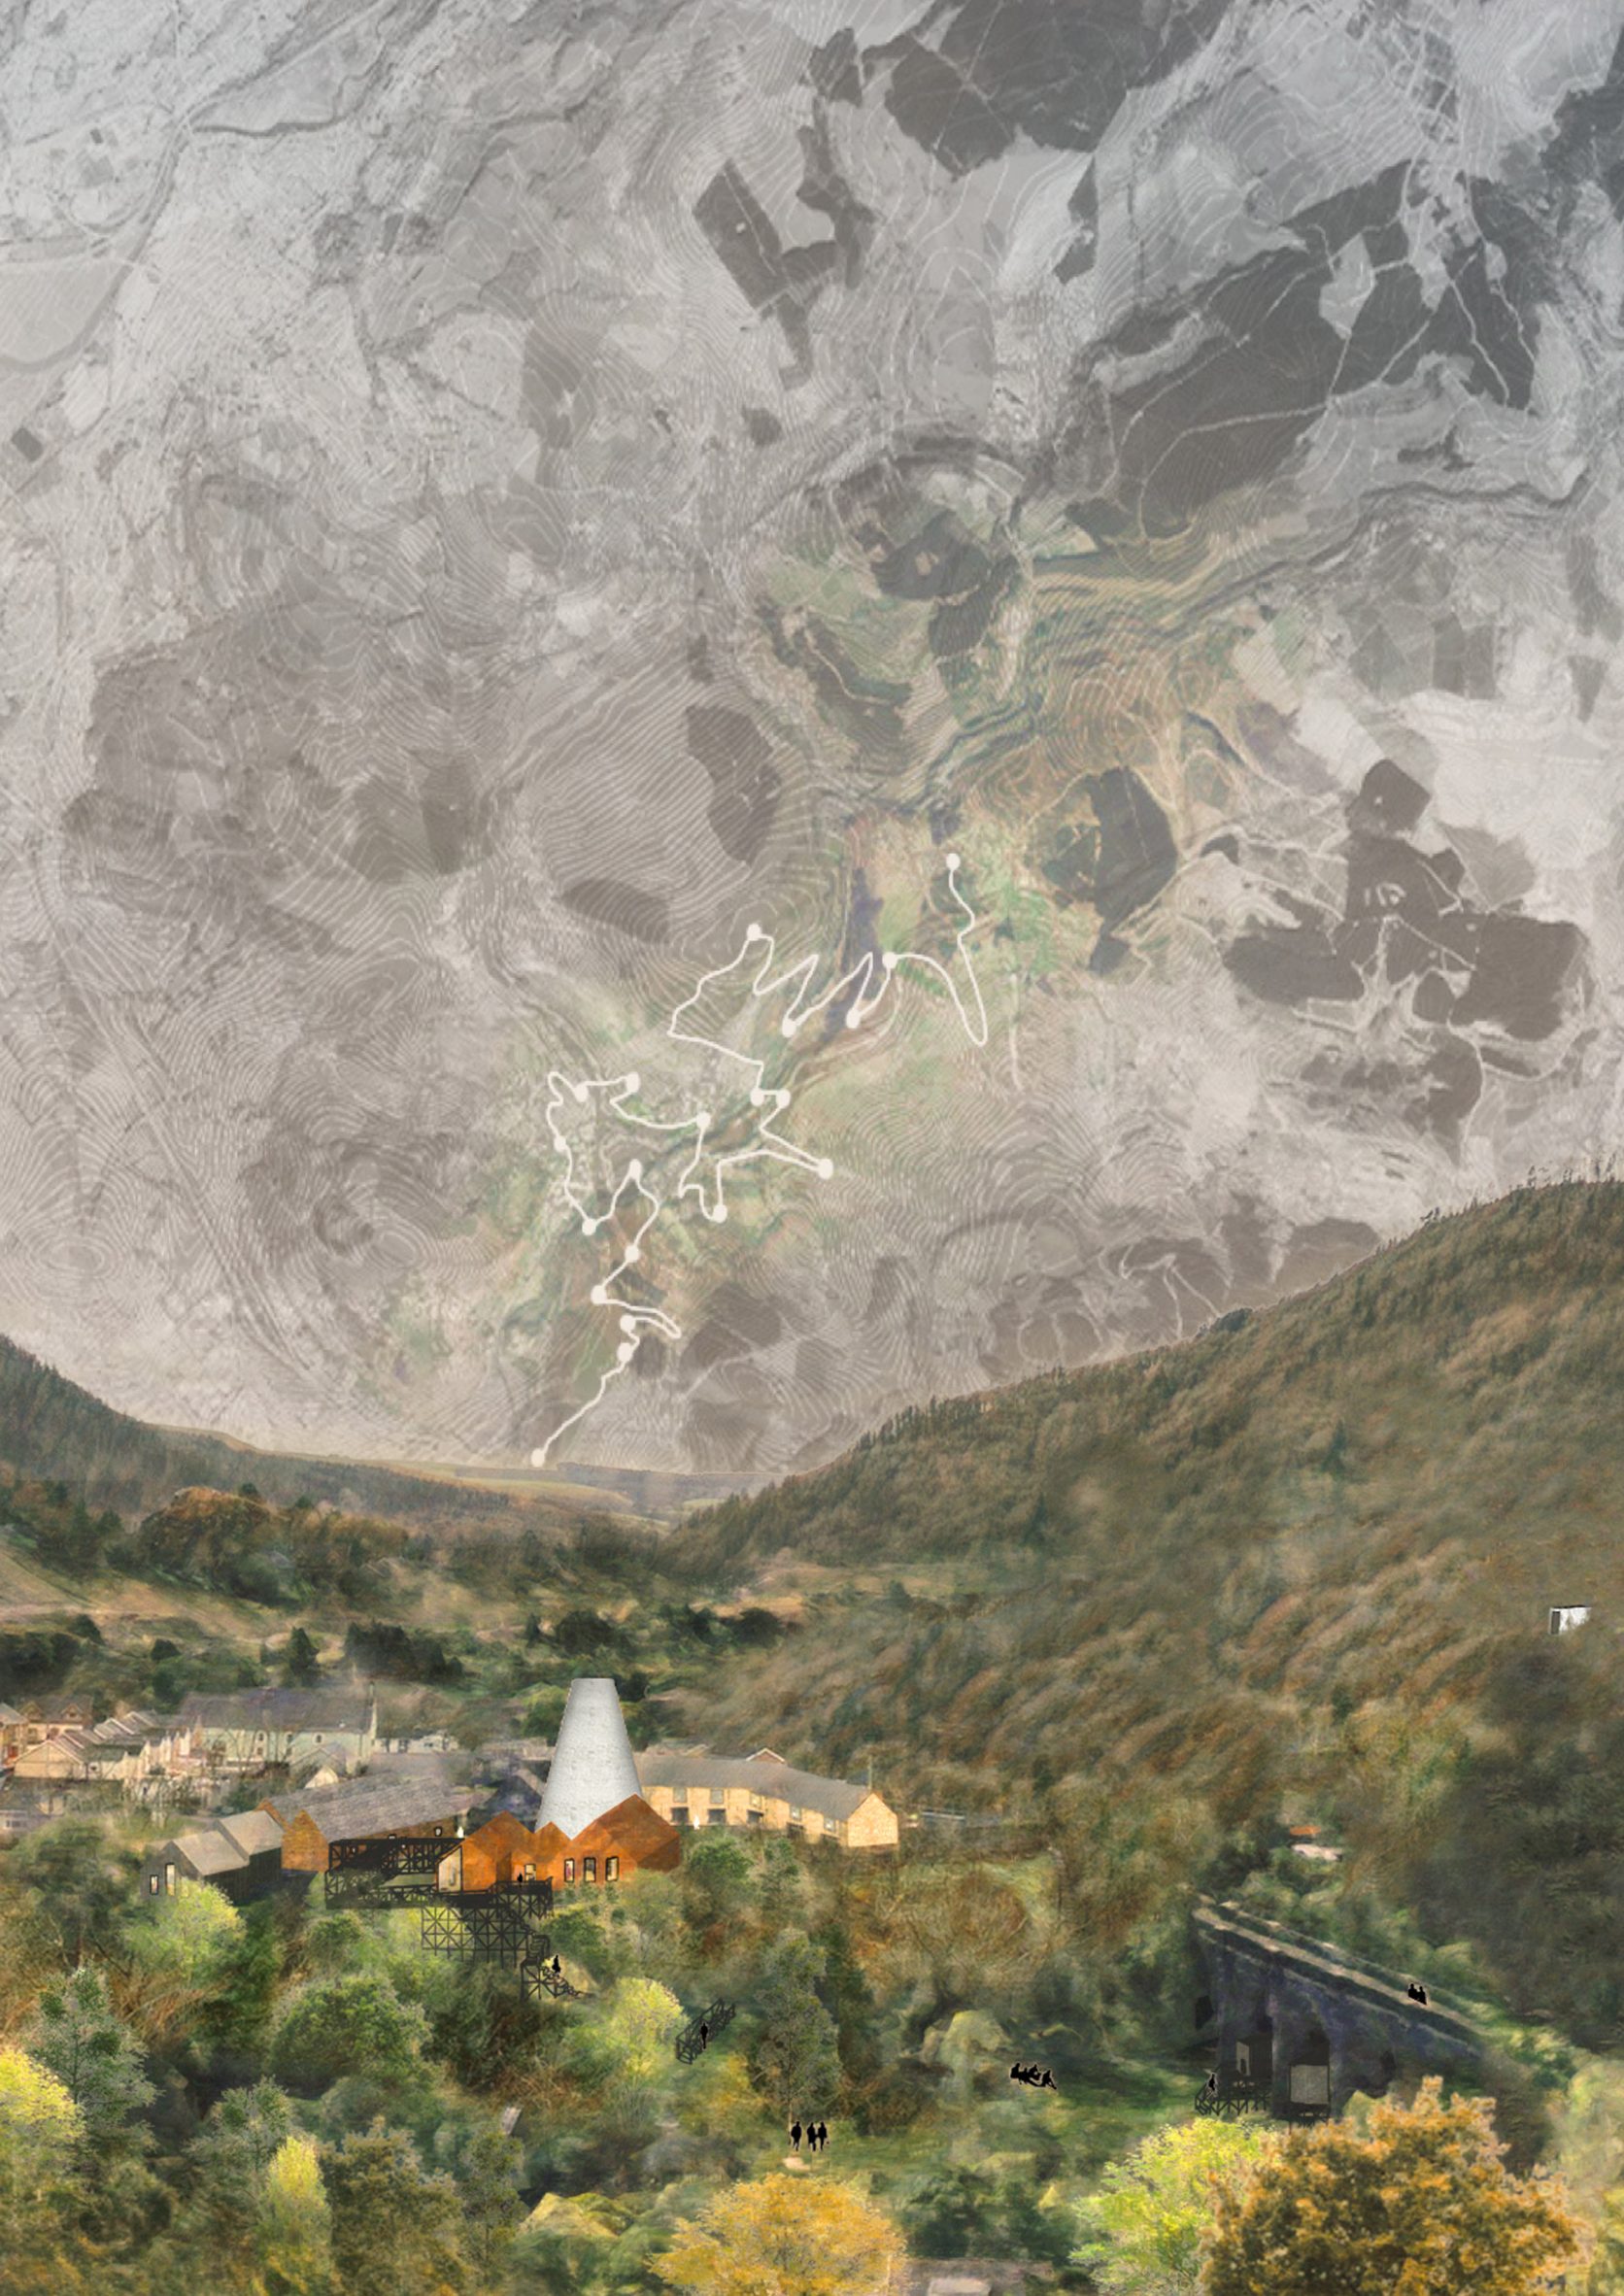 Collage render of factory and domestic buildings in a valley with a plan drawing overlayed on the sky